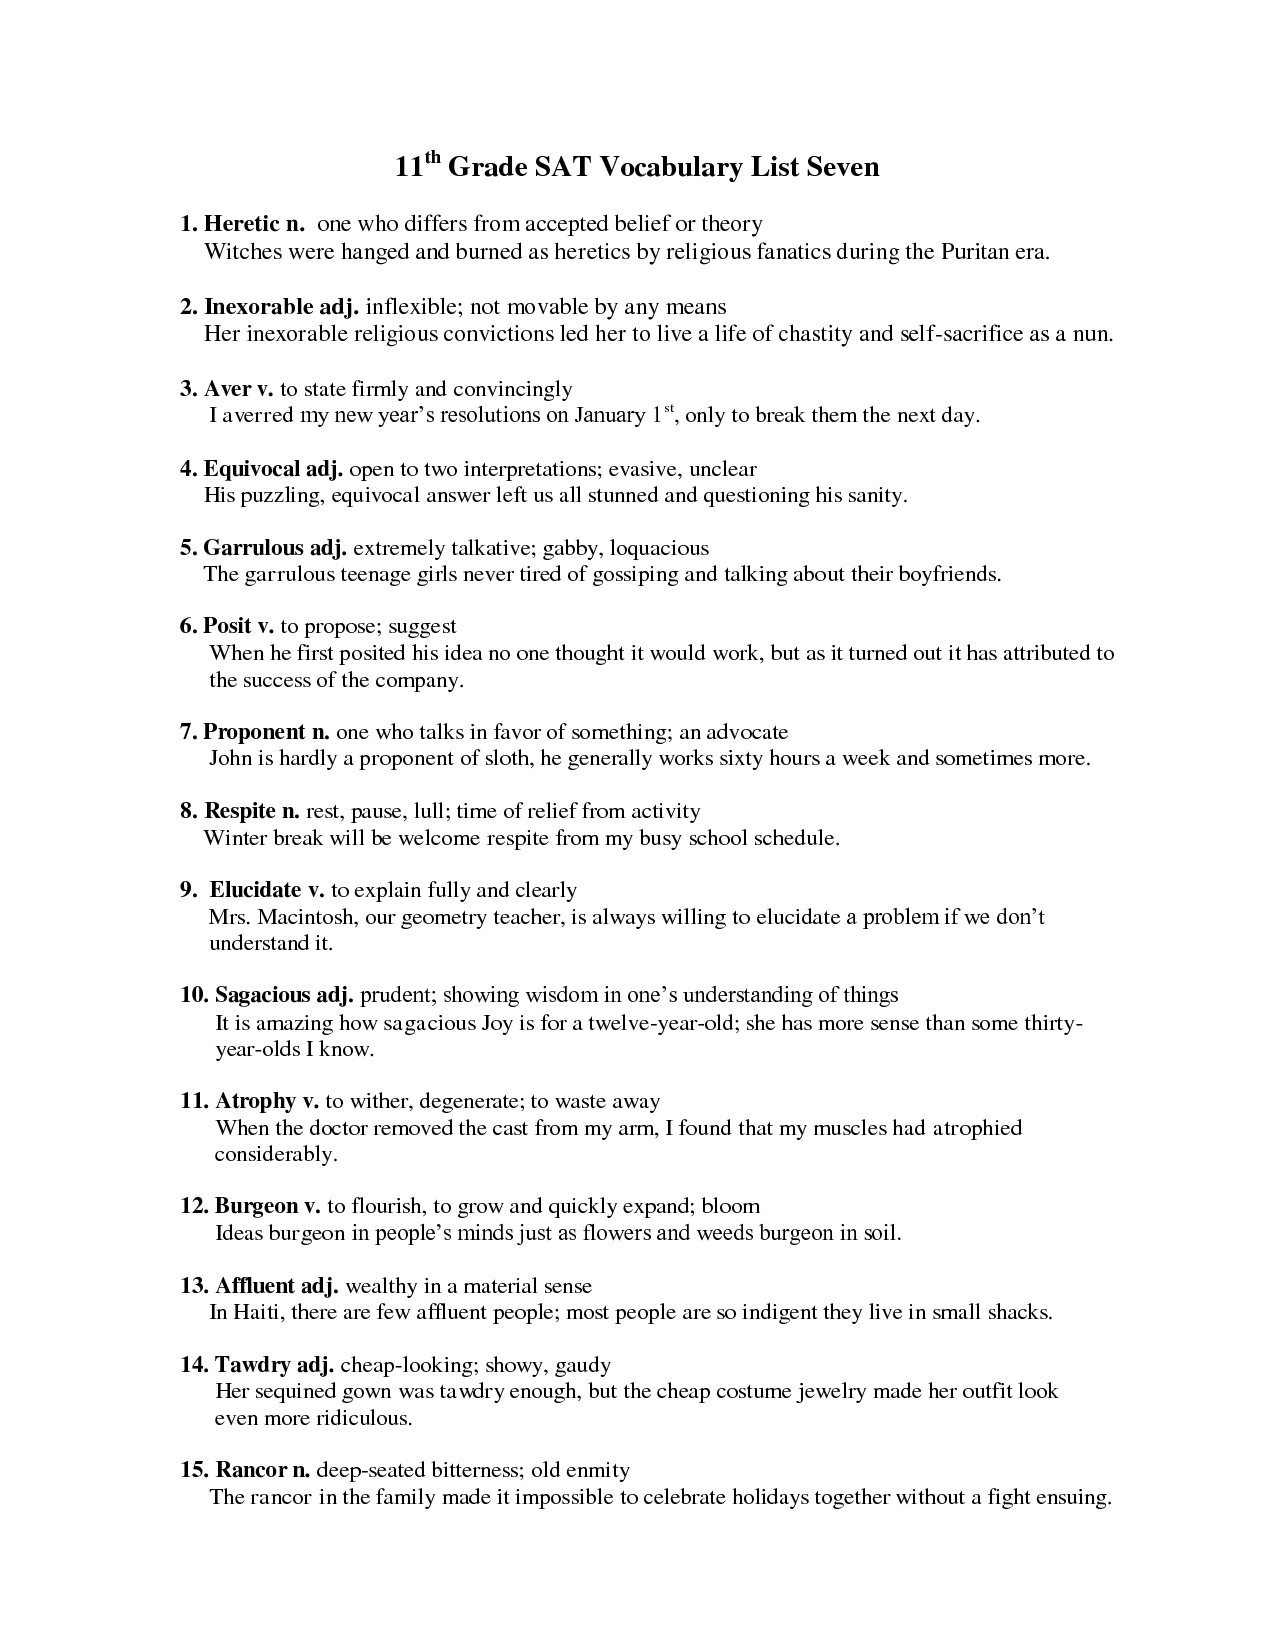 13 Best Images of Sat Vocabulary Worksheets PDF - Printable Vocabulary